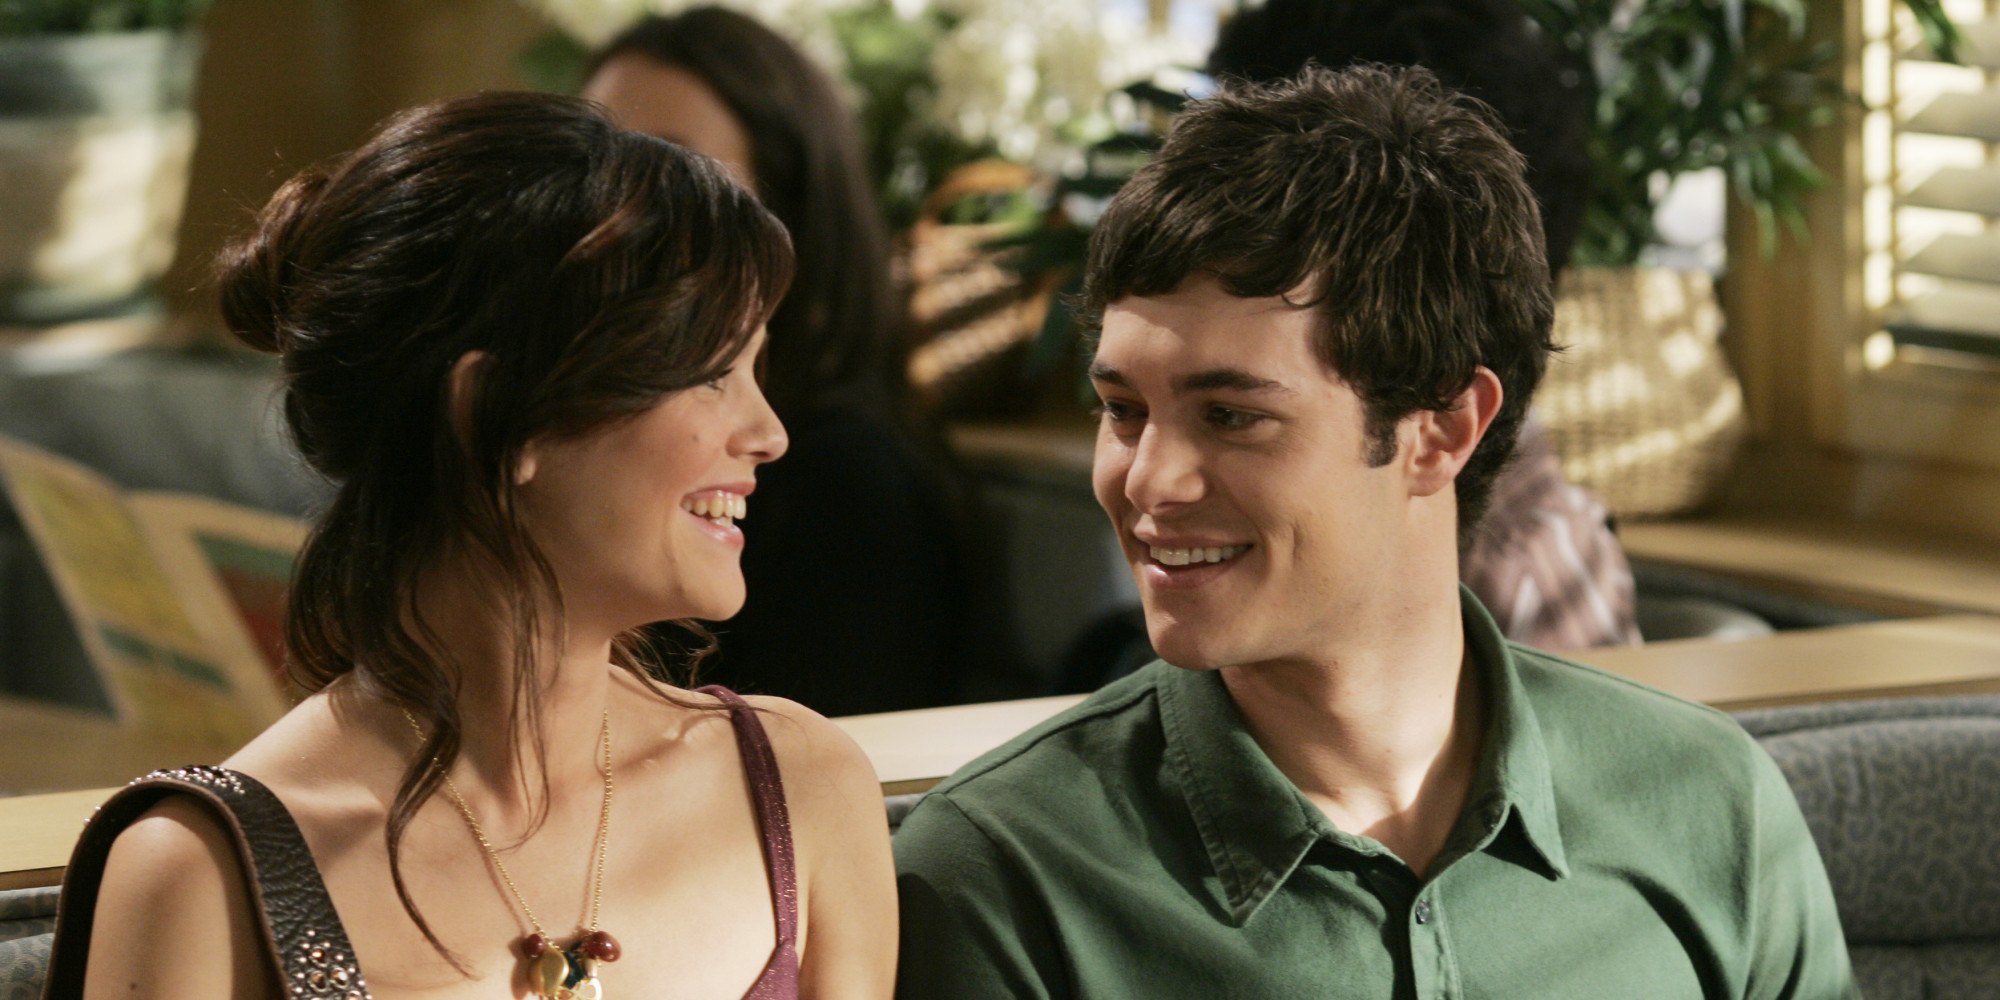 Rachel Bilson as Summer Roberts and Adam Brody as Seth Cohen on The O.C.